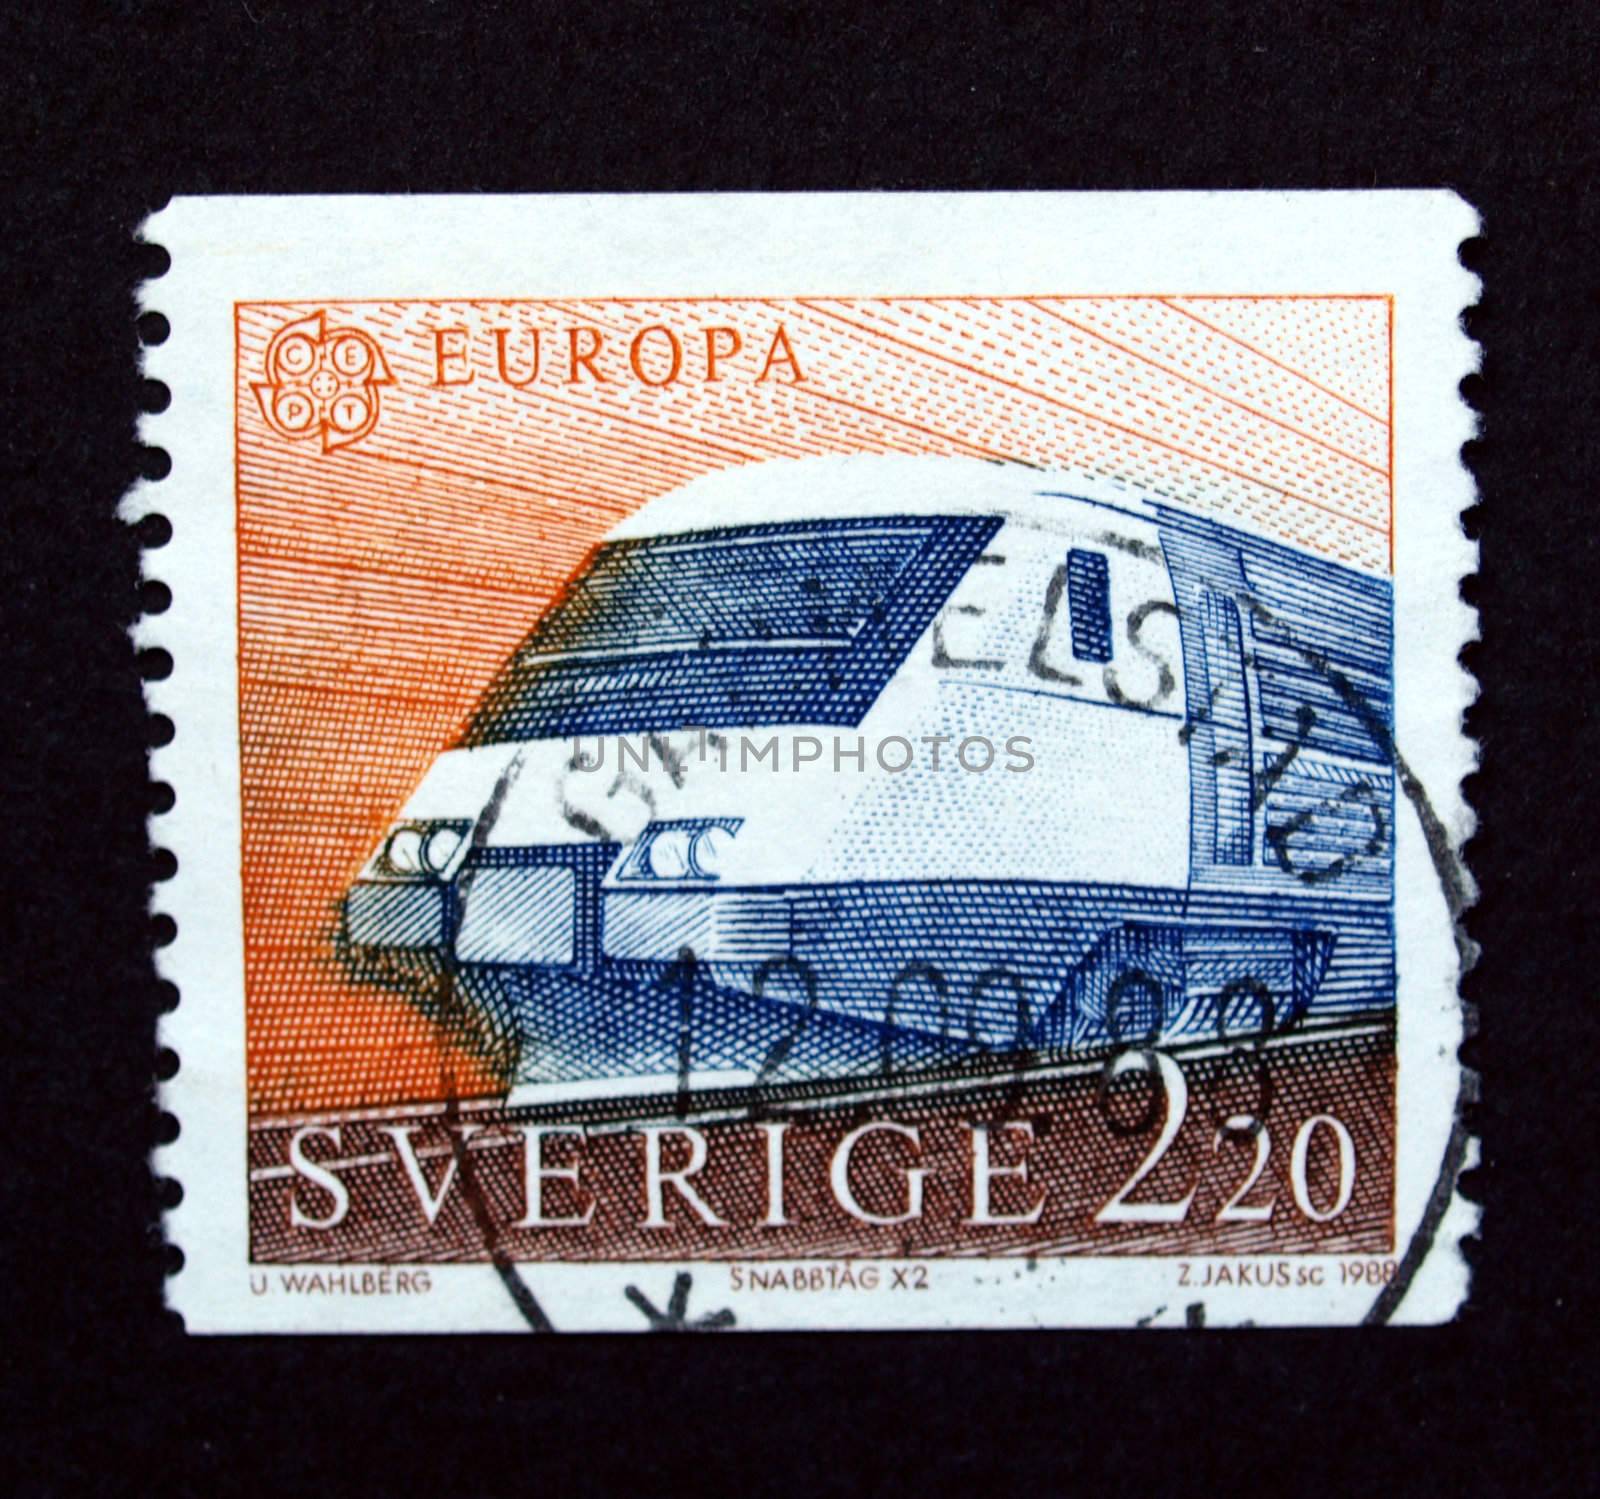 Sweden stamp with train on black